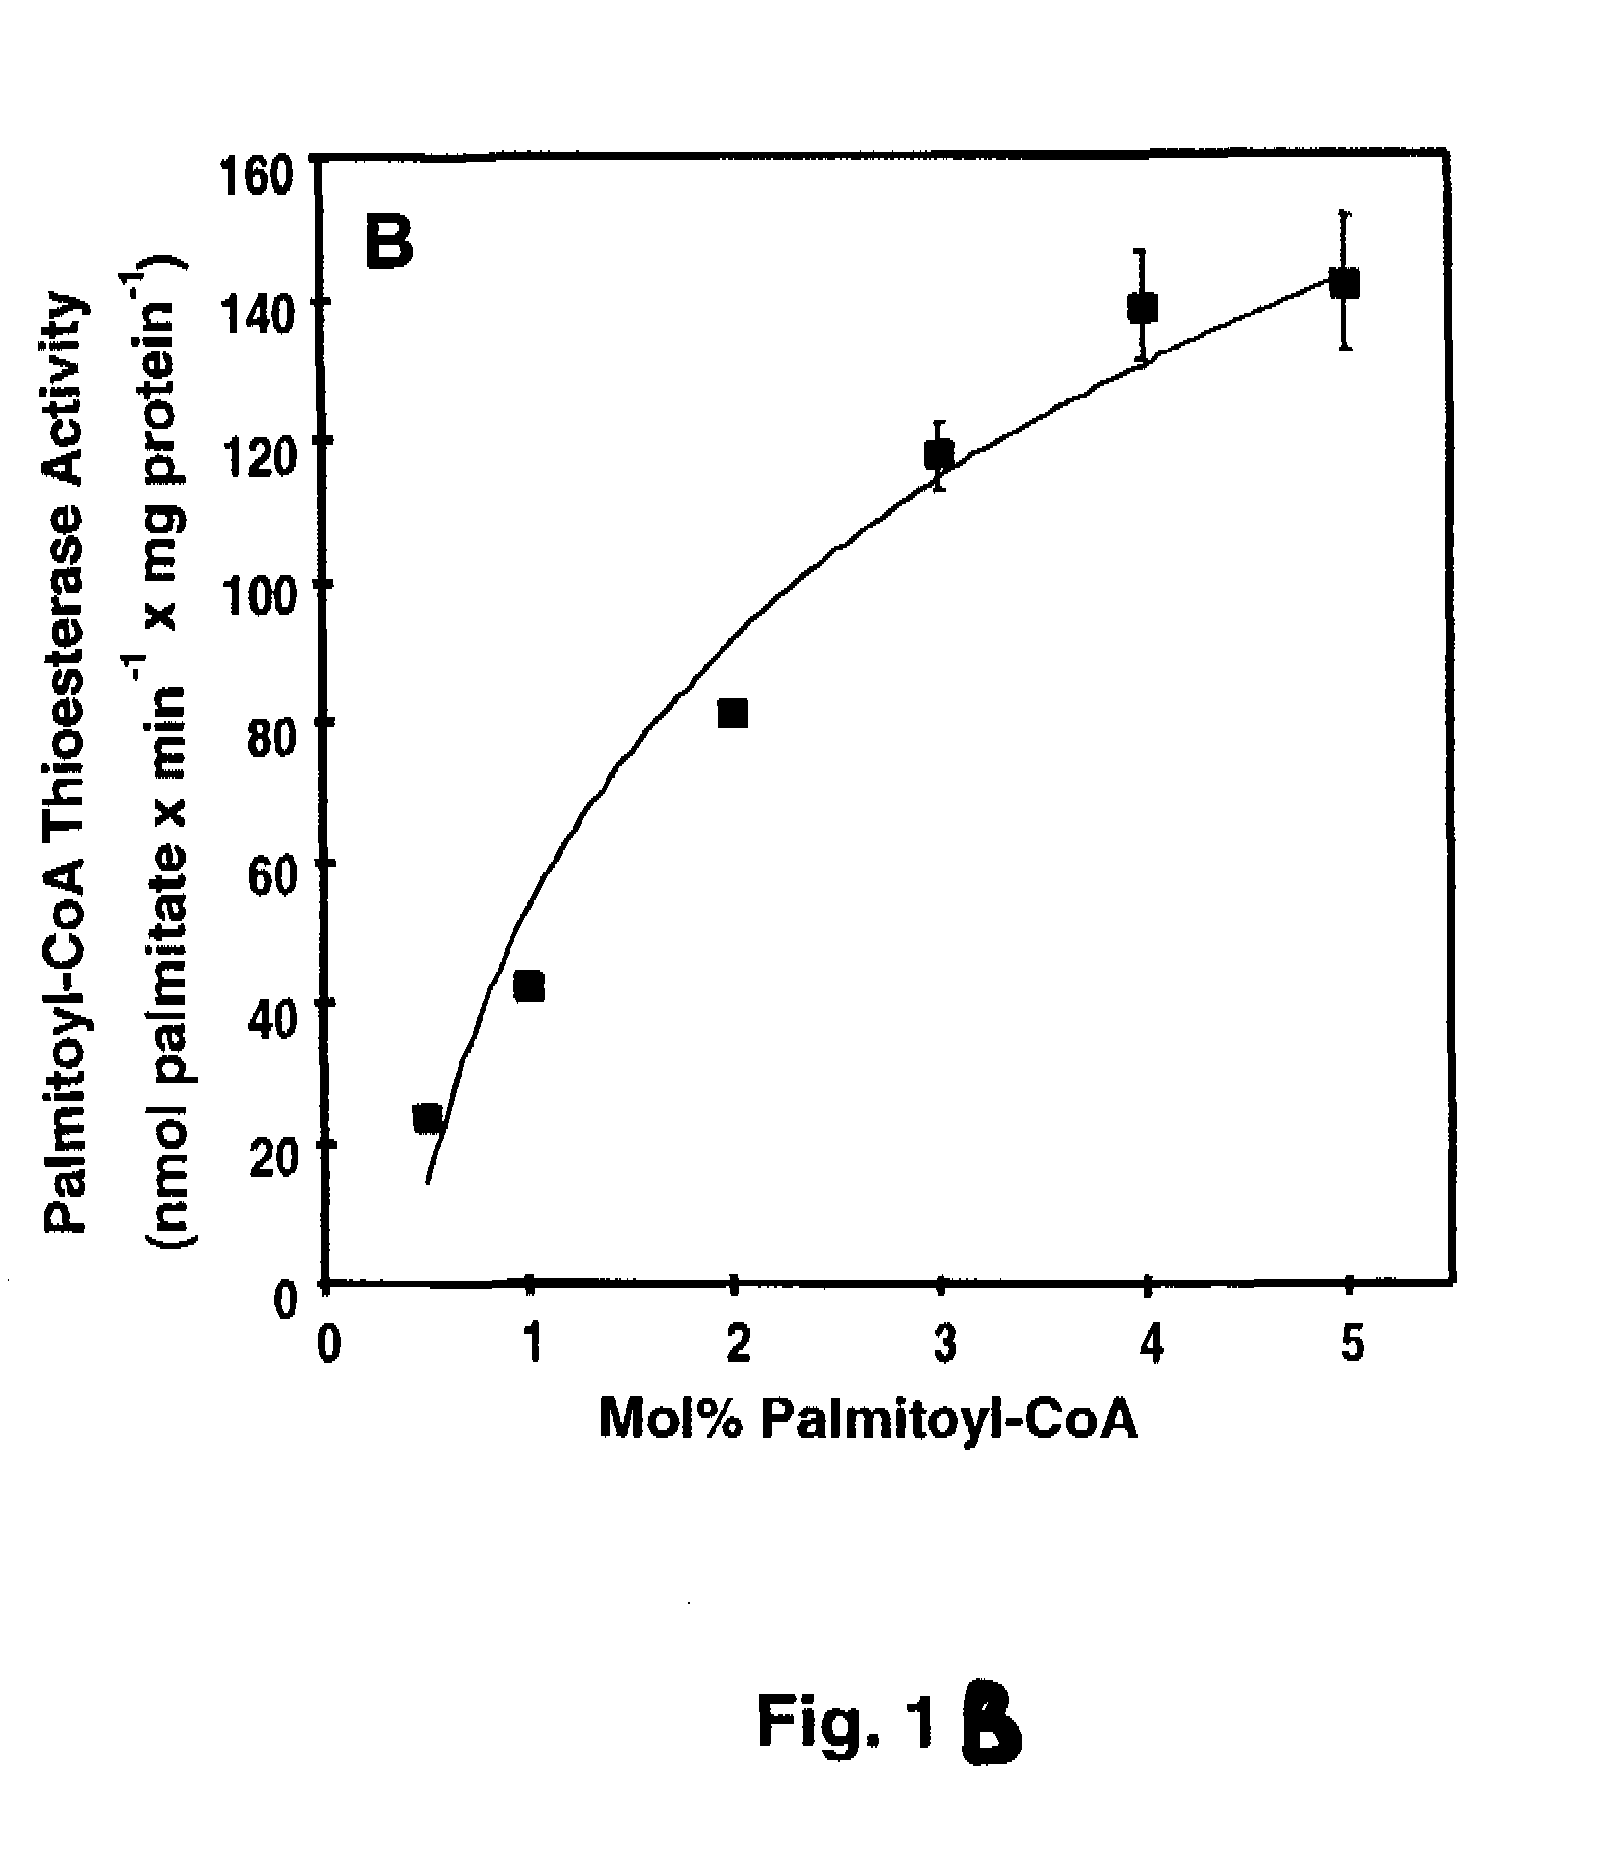 Enhanced medical treatments resulting from chemical identification of calcium influx factor, identity with the factor activating phospholipolysis and precipitating sudden death during myocardial infarction, and determination of similar activating mechanisms in multiple cell types through disinhibition of calcium-independent phospholipase a2beta